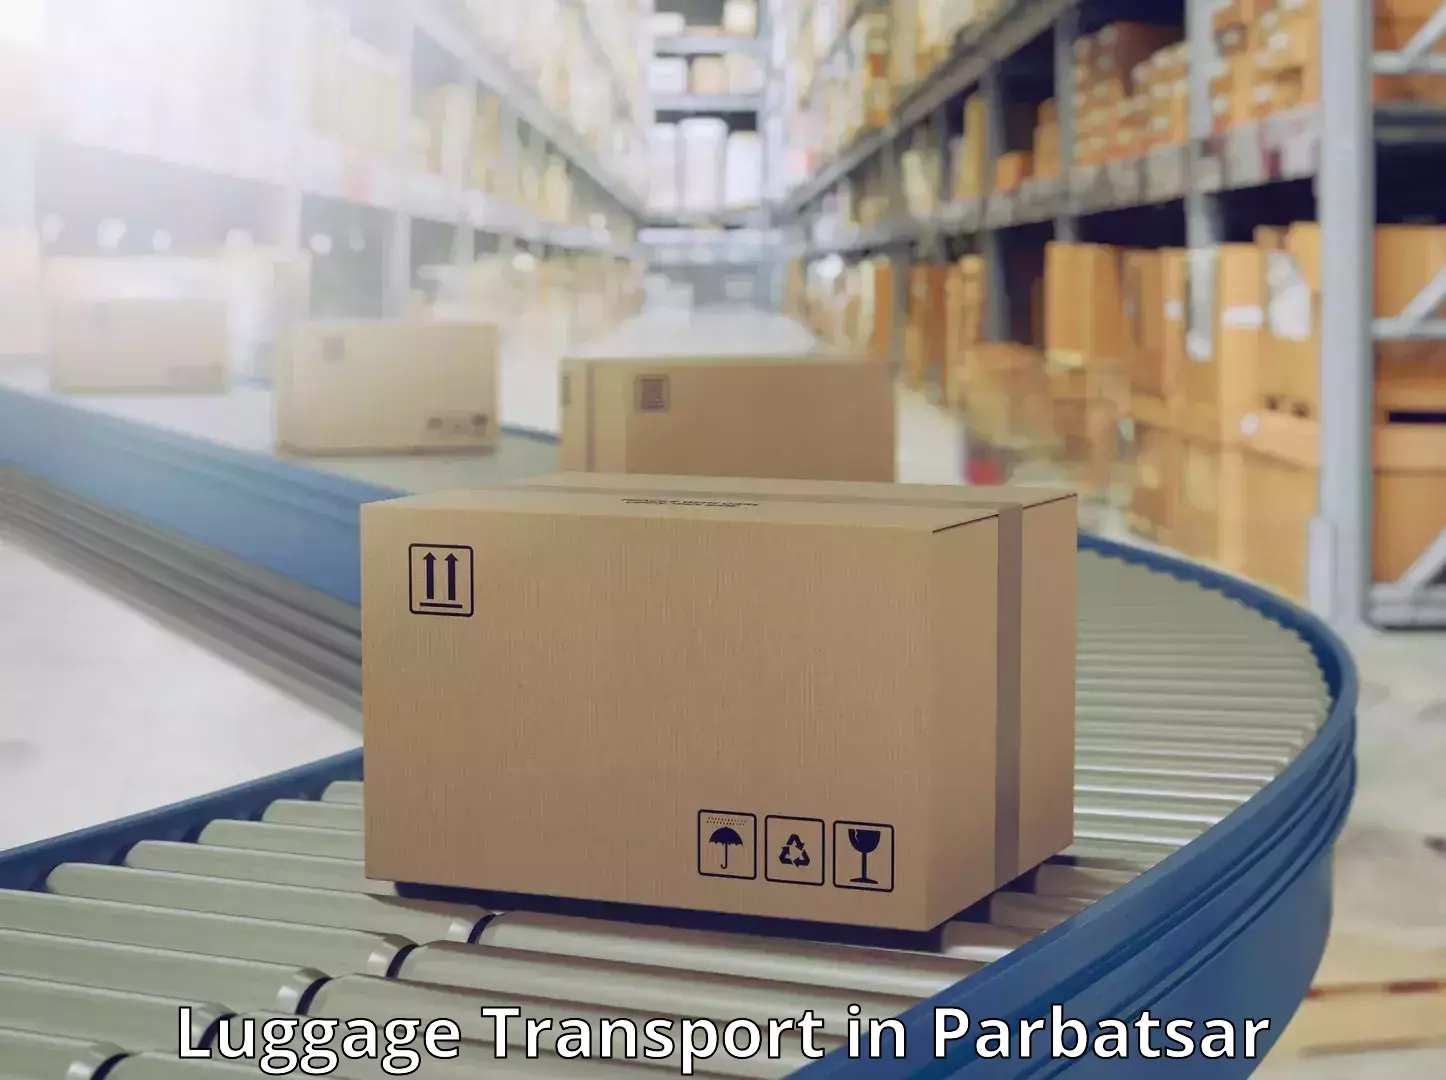 Baggage shipping experience in Parbatsar